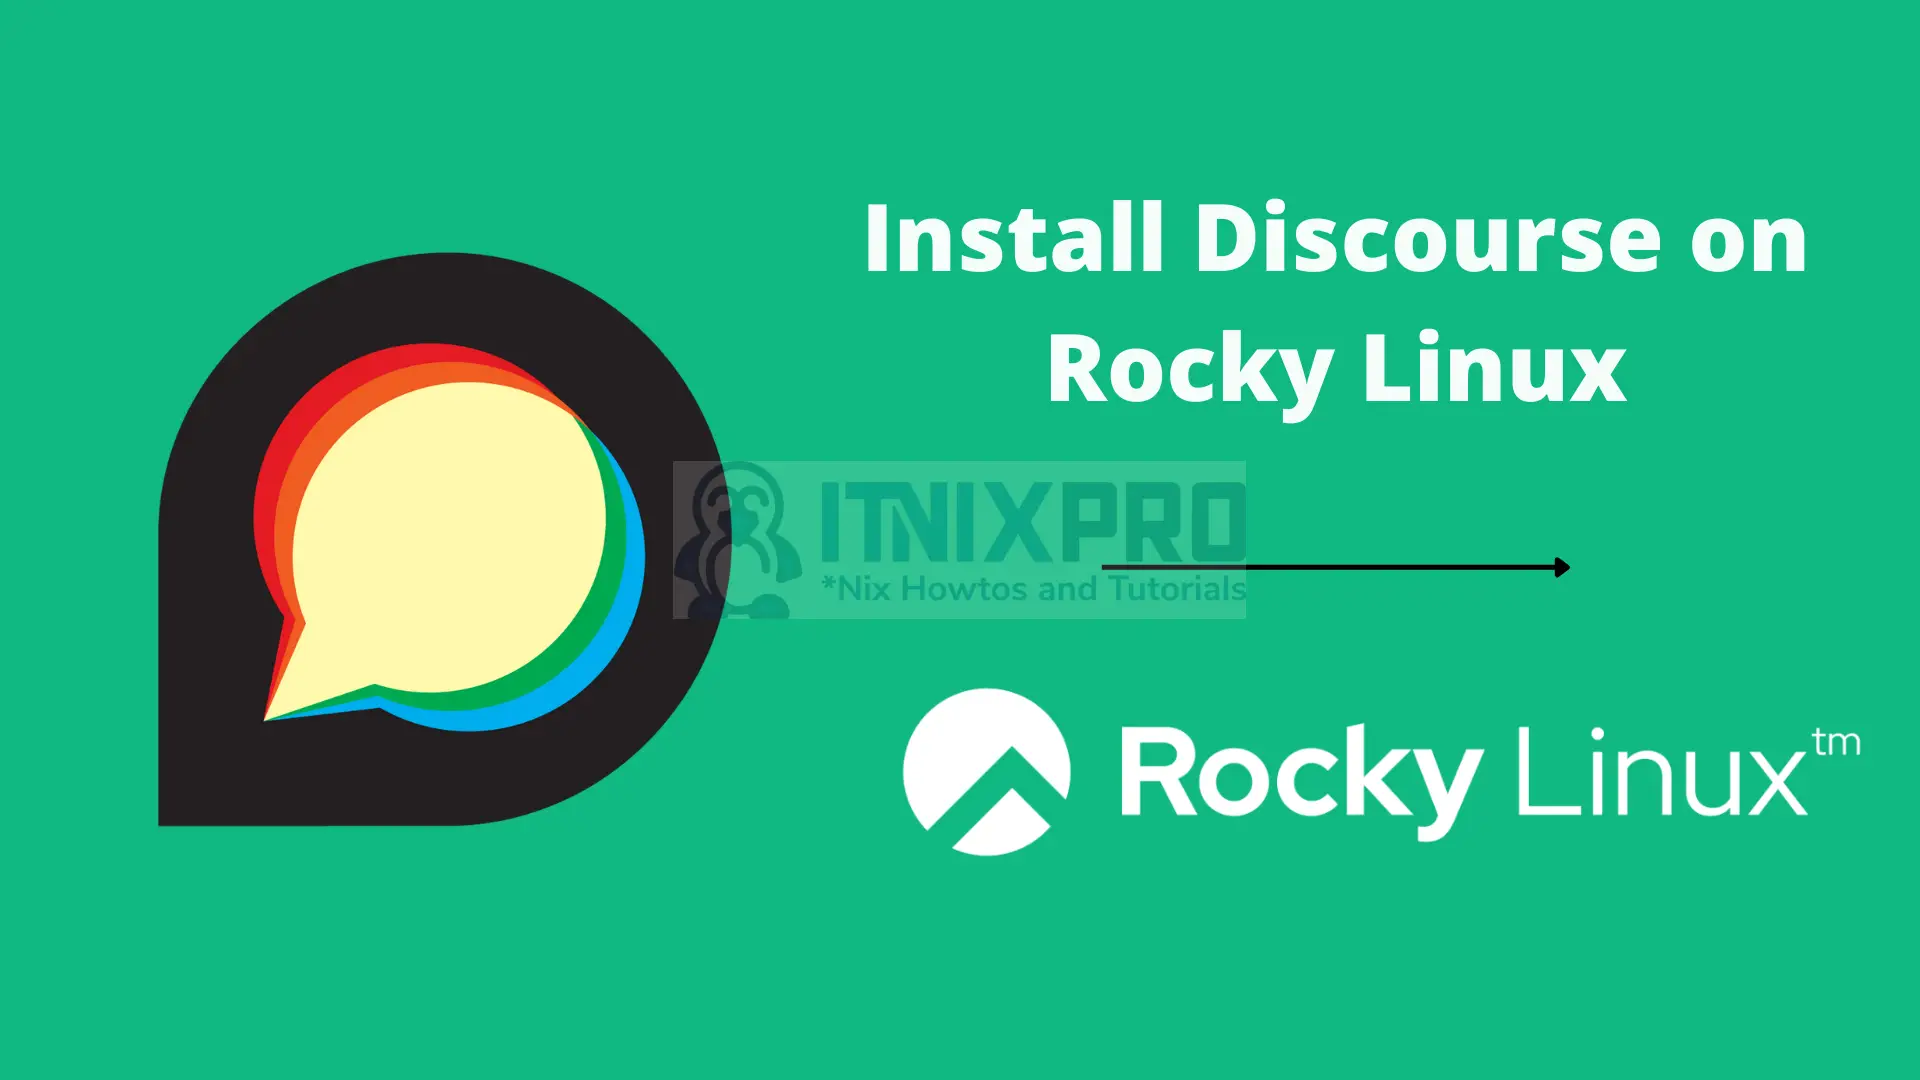 Install Discourse on Rocky Linux